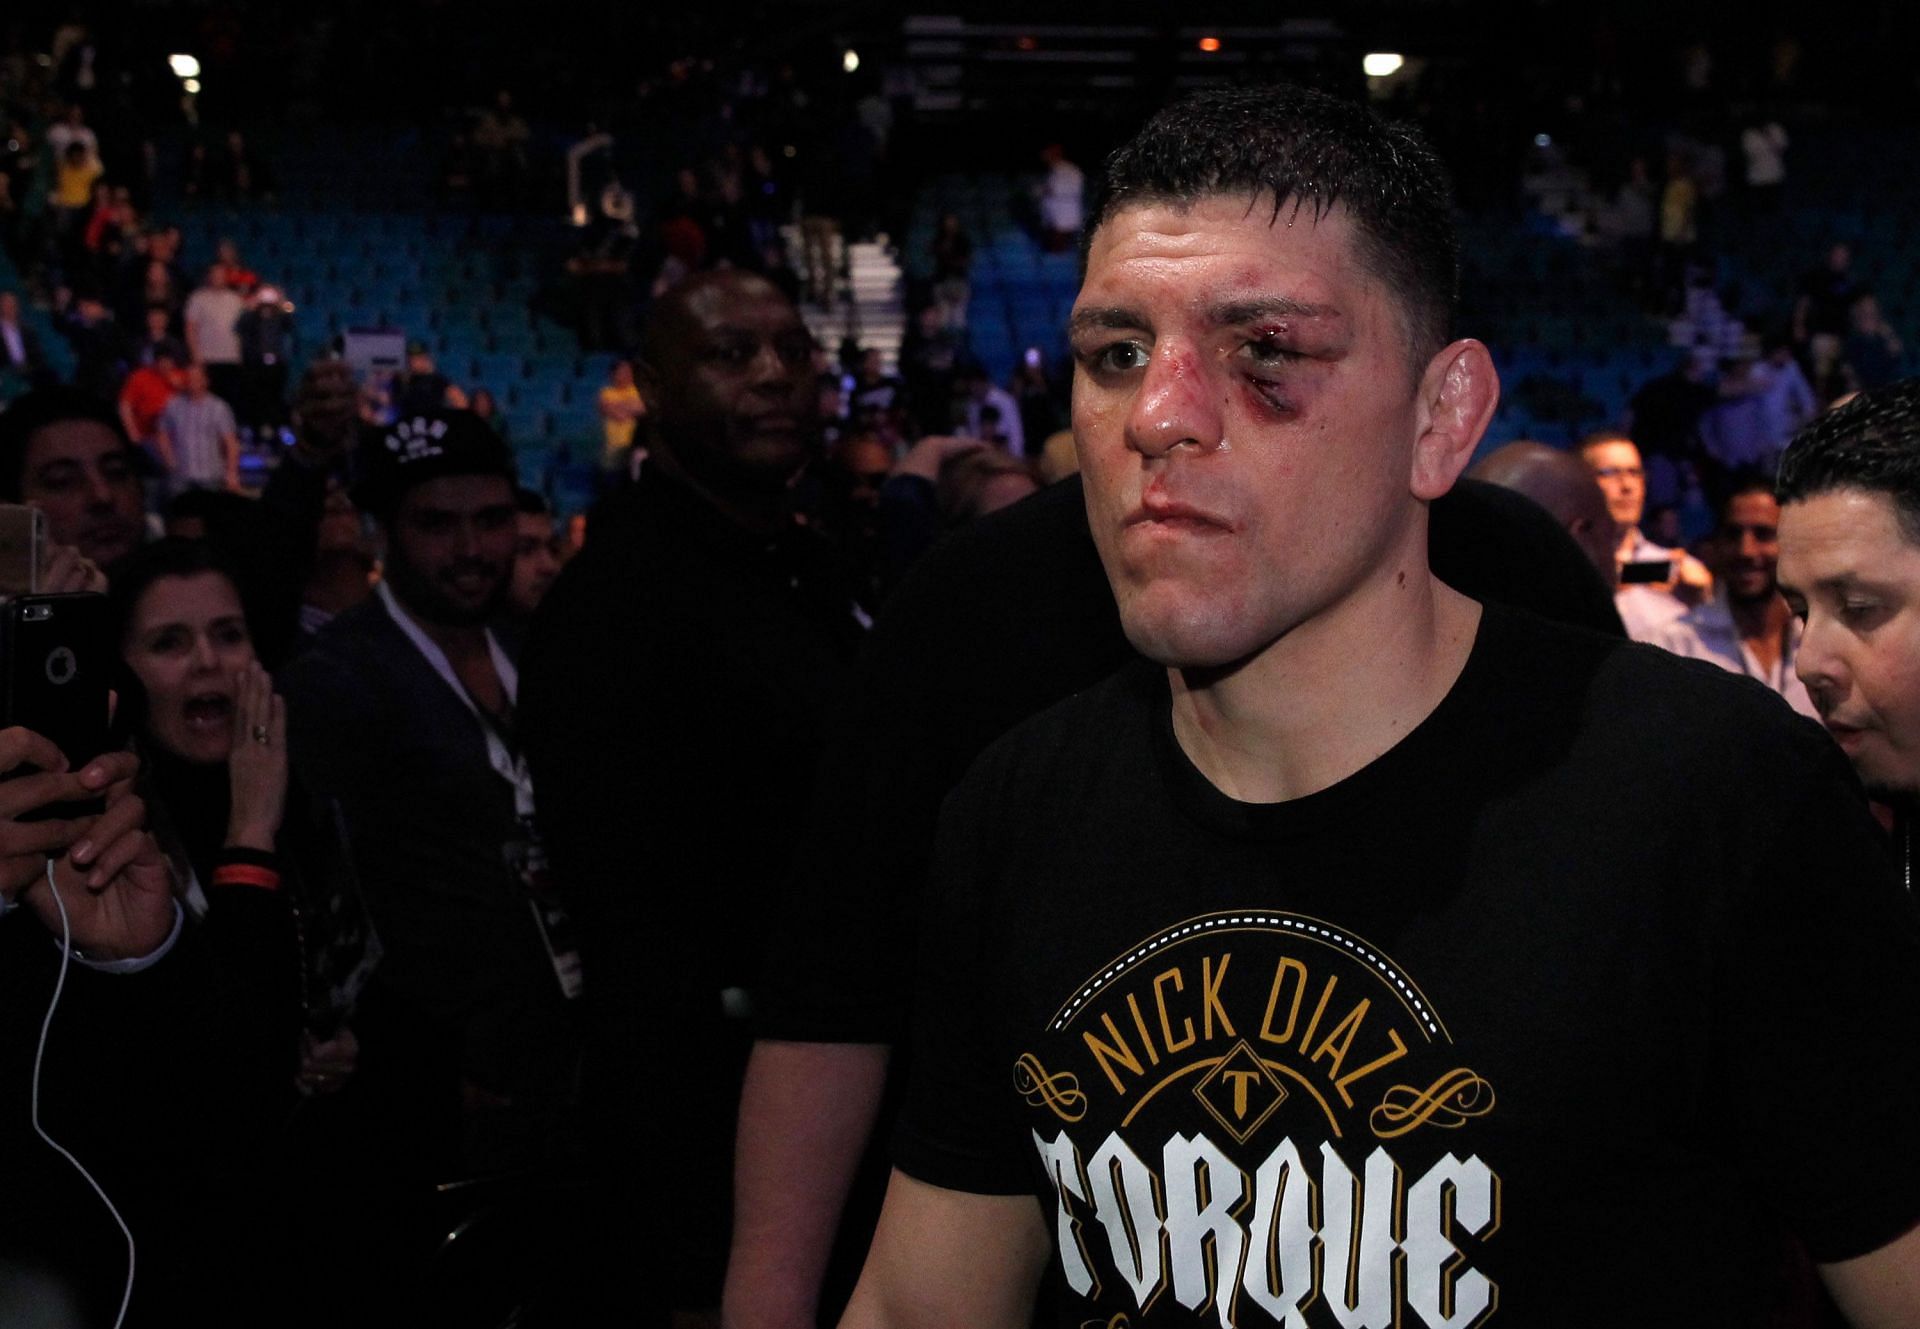 Nick Diaz always tried to get under the skin of his opponents